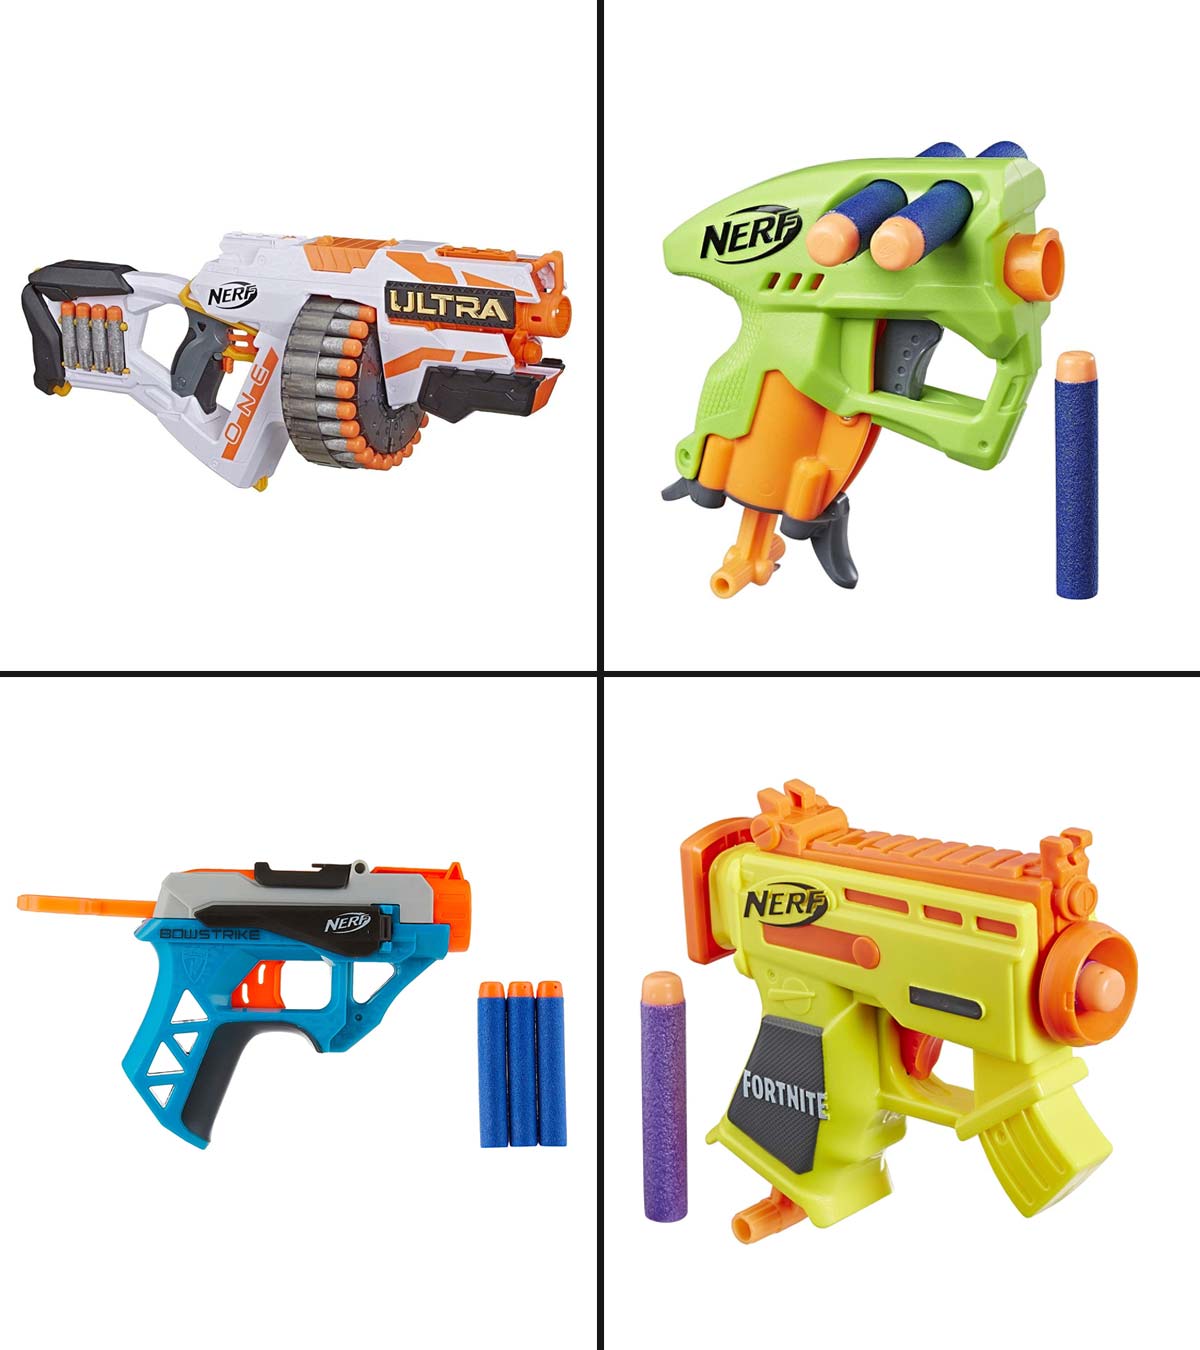 Toy Gun for Nerf Guns Automatic Machine Gun - Electric Toy Foam Blasters &  Guns with 30 Bullets for Boys 8-12, DIY Motorized Outdoor Shooting Games Gun,  Great Birthday Gift for Kids